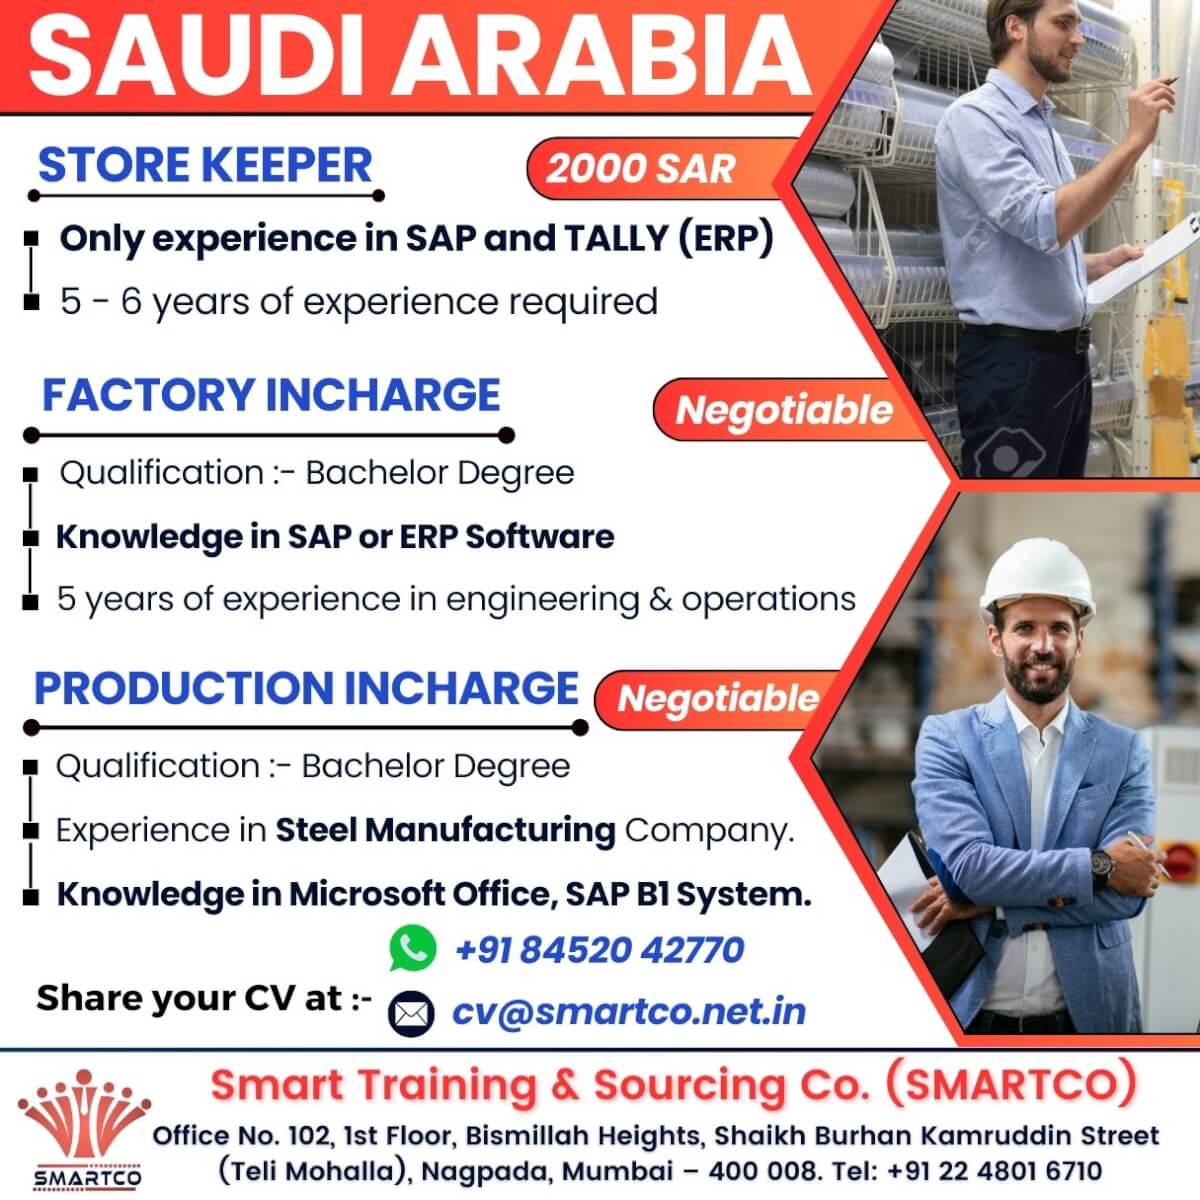 URGENTLY REQUIRED BY A HIGHLY REPUTED COMPANY IN SAUDI ARABIA